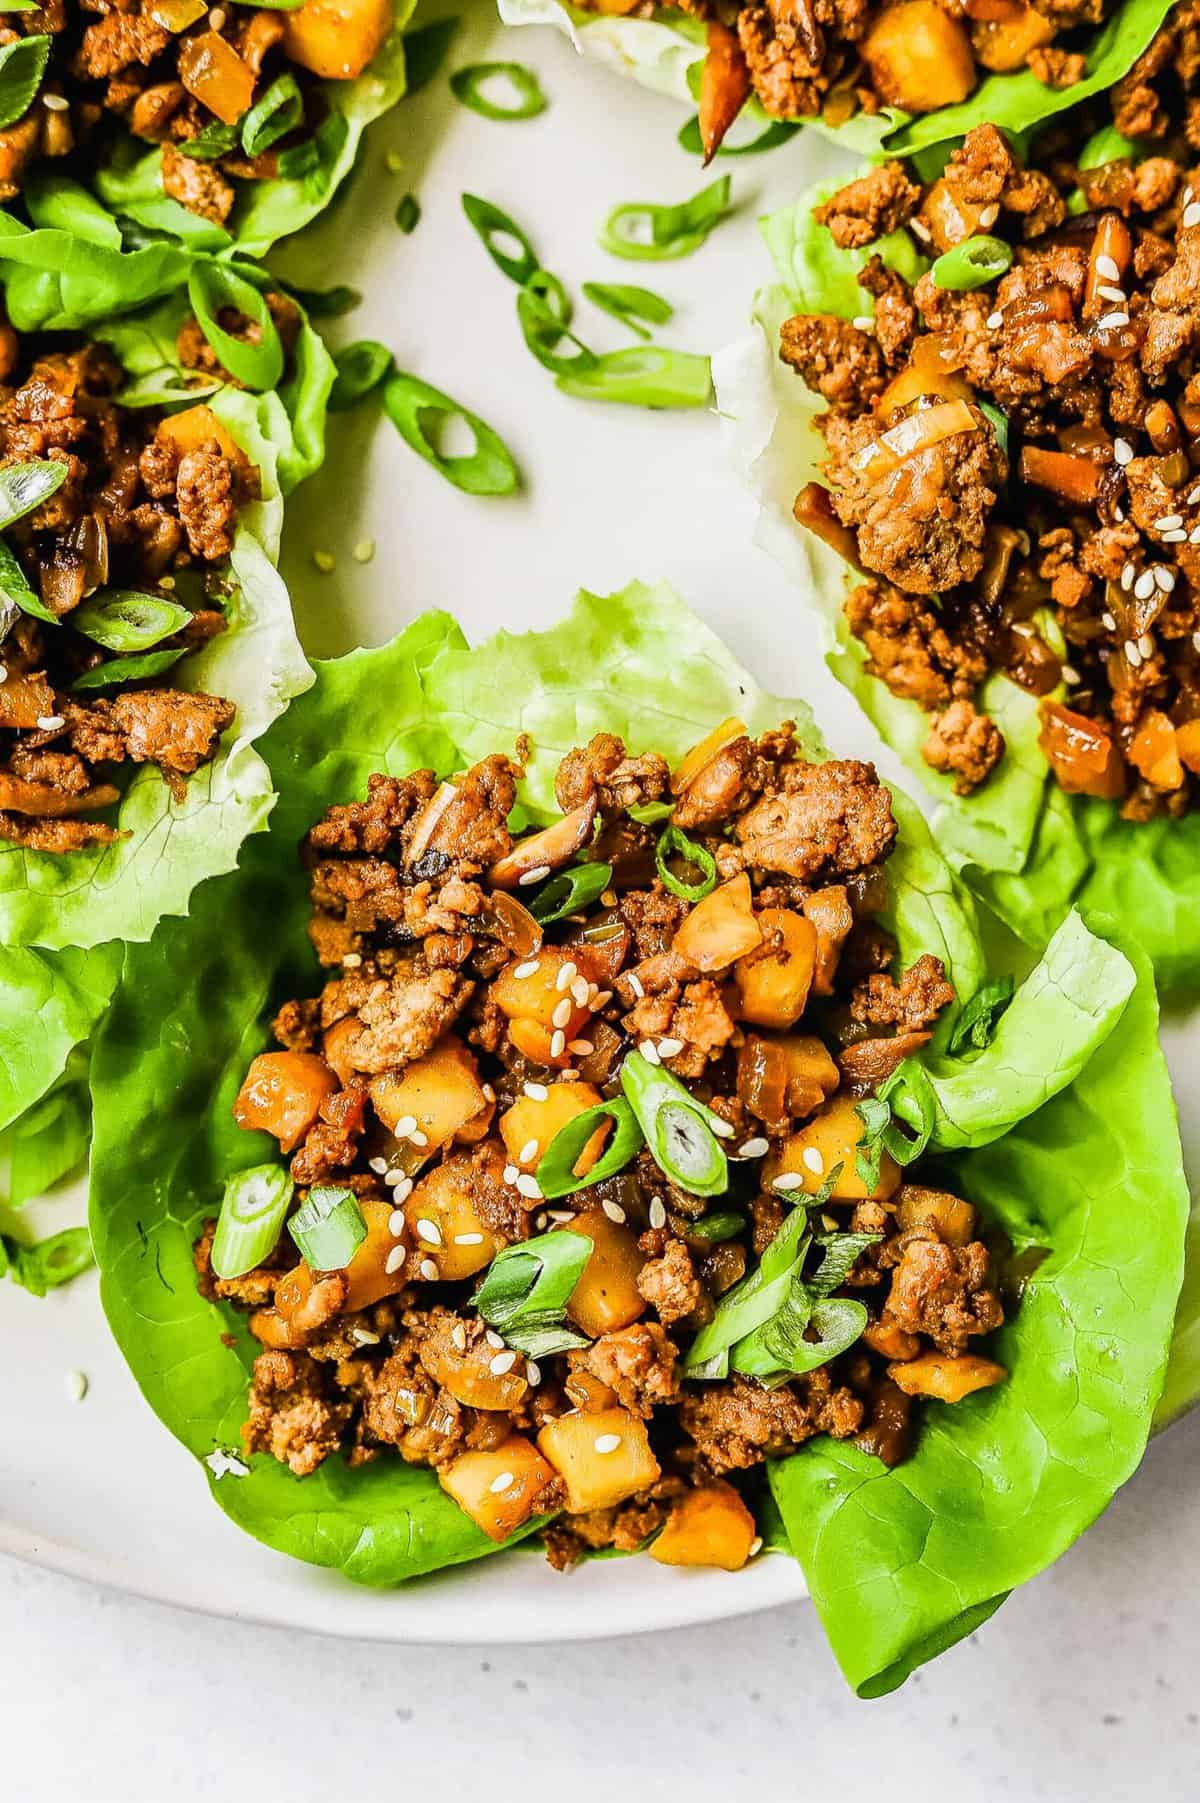 Chicken lettuce wraps with water chestnuts, ground chicken, and shiitake mushrooms.